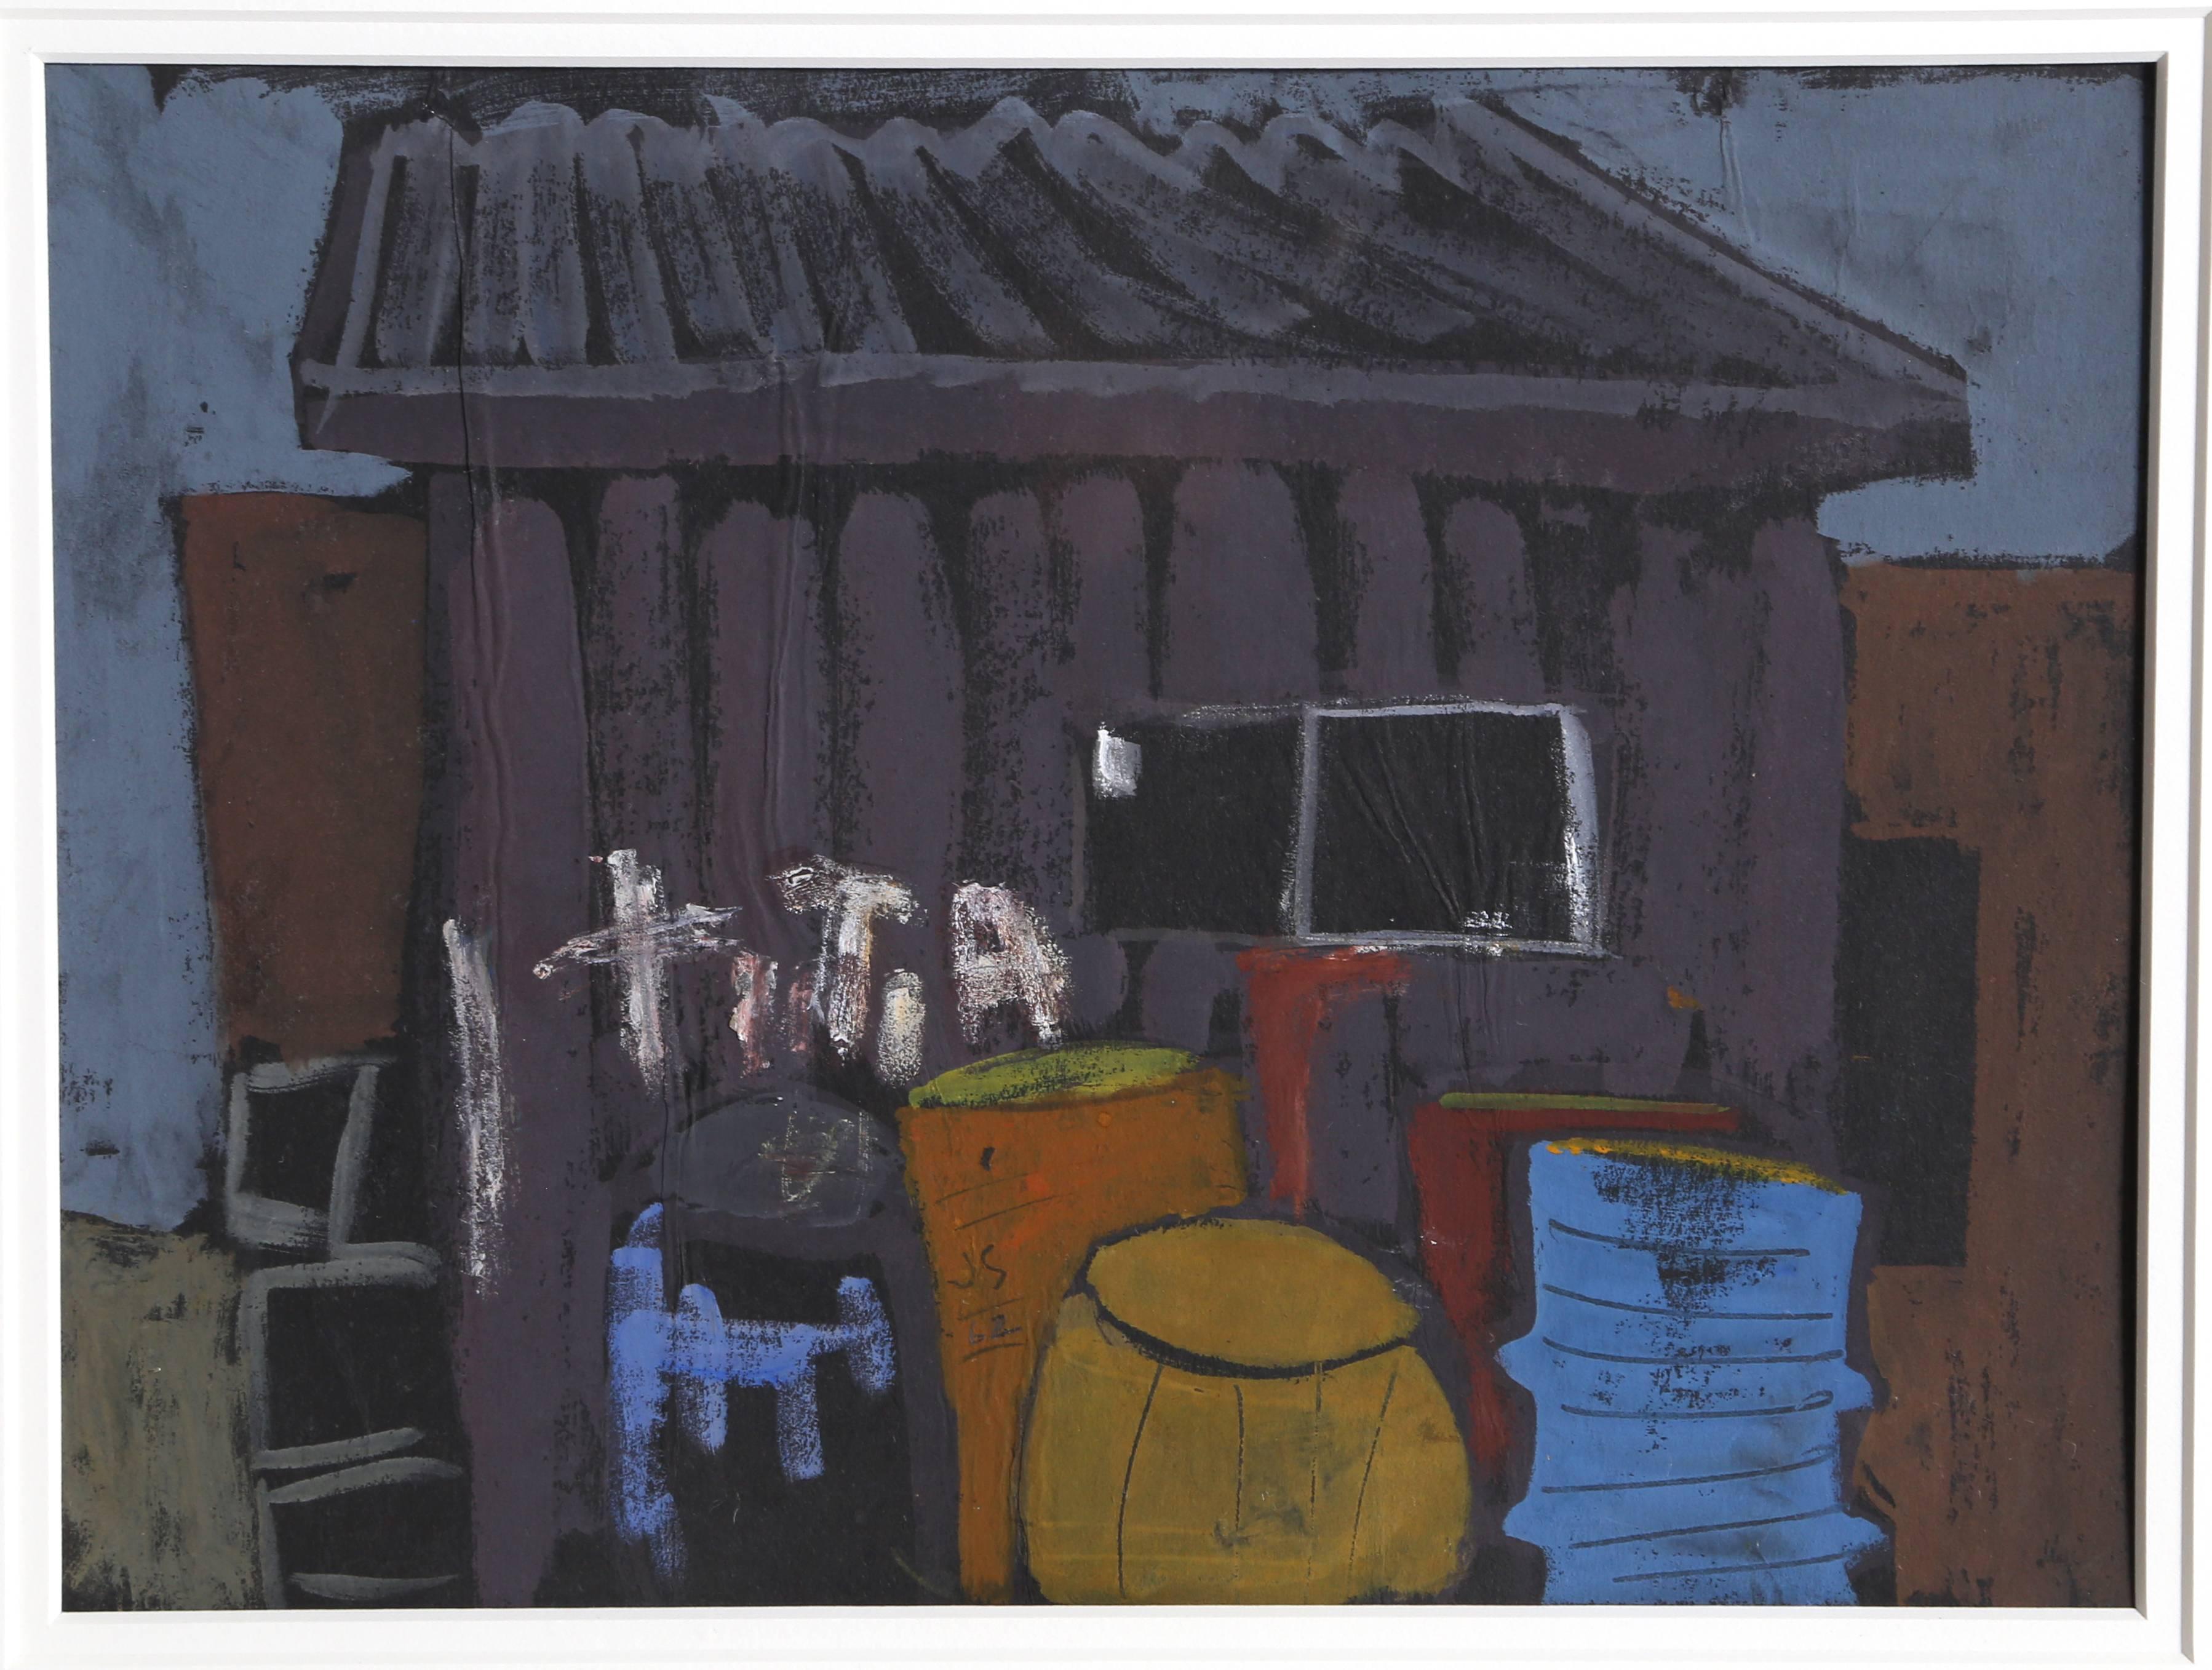 Artist: Joseph Solman, American (1909 - )
Title: Provincetown Dock
Year: 1962
Medium: Gouache on black paper, signed and dated l.c.
Size: 9 x 11.5 inches
Frame Size: 19 x 22 inches